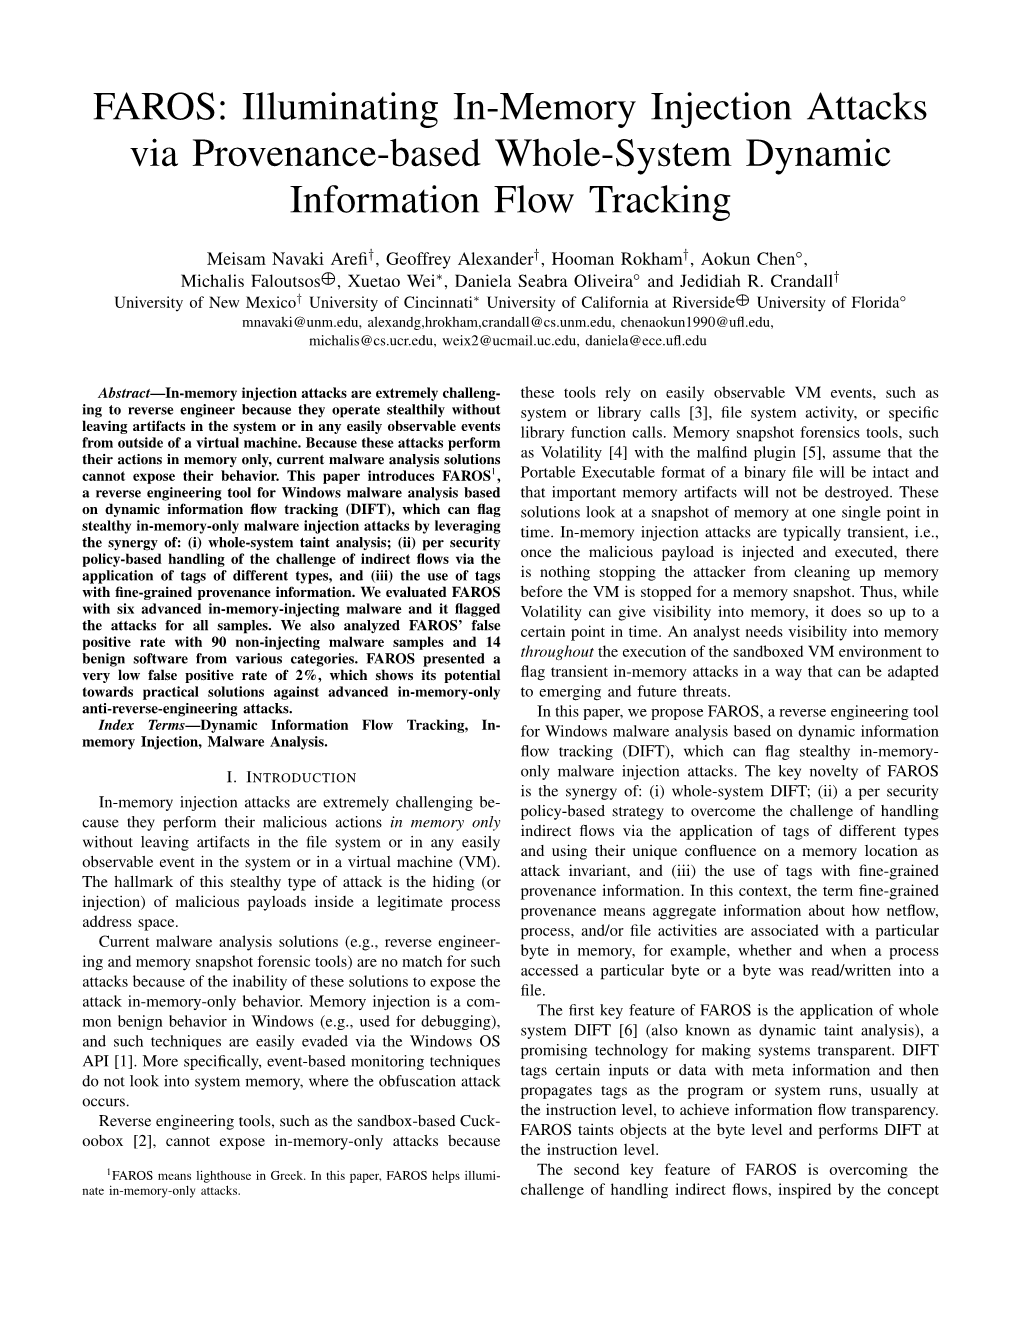 Illuminating In-Memory Injection Attacks Via Provenance-Based Whole-System Dynamic Information Flow Tracking